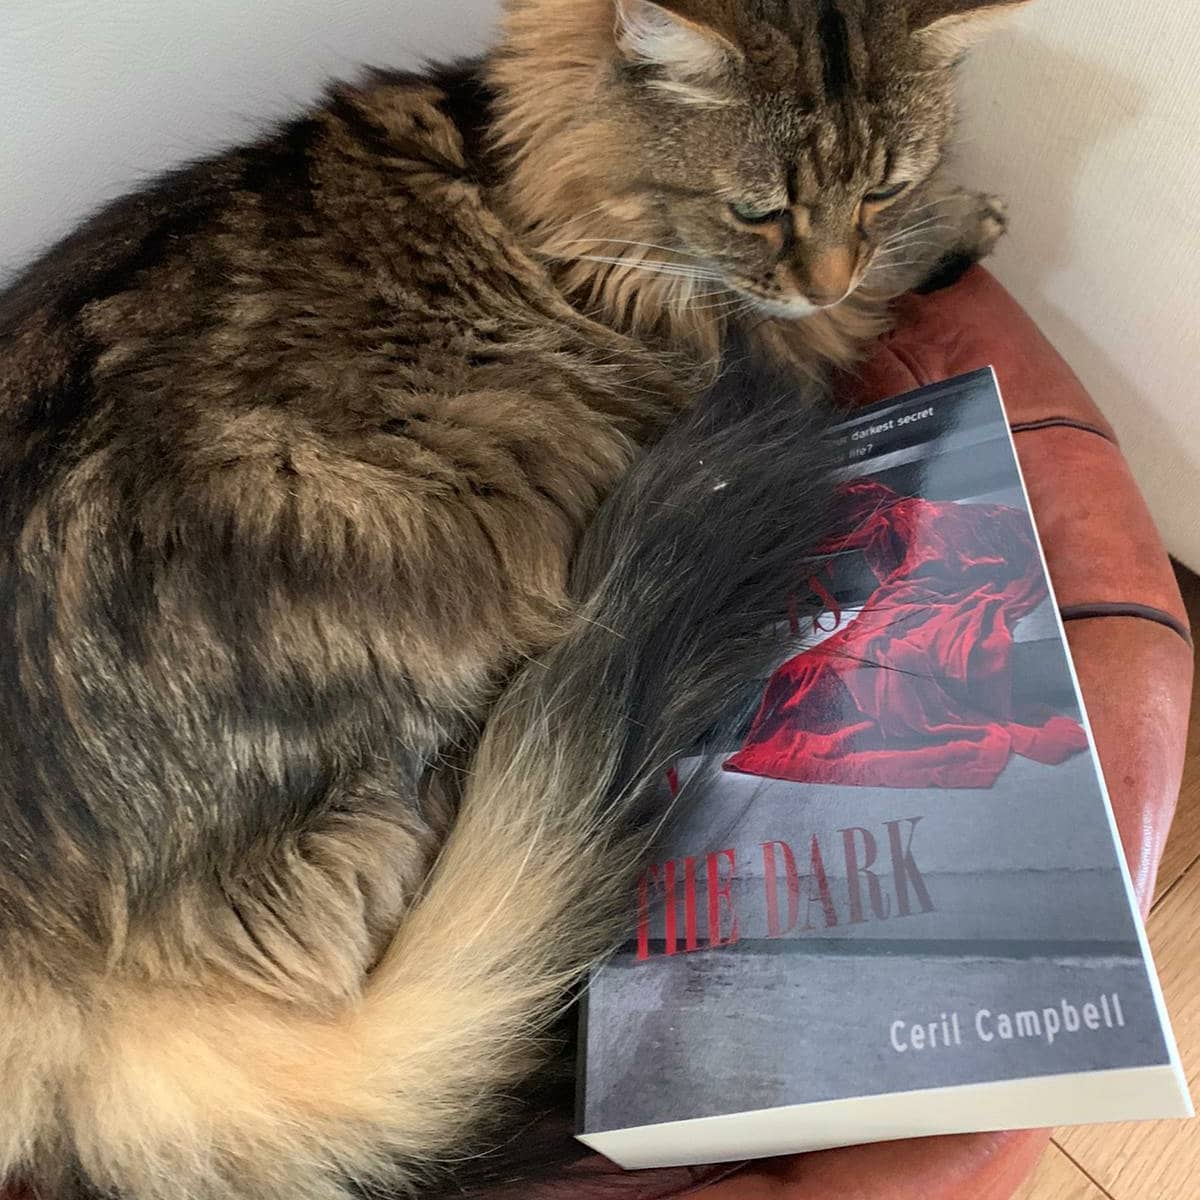 My debut novel 'Secrets in the Dark' has just been bagsied to read by Luna the cat before her human even started to read it. 
 
The book is just published and available on Amazon as a Kindle or paperback.

I hope you will enjoy it as much as Luna and if so - I will be thrilled if you can spread the word on Amazon rated reviews and any social media.

Synopsis:
The Kings Road, Chelsea in 1970’s London is the epicentre for fashion, music and unlikely friendships - where it’s now cool for posh, privileged girls to mix outside their social circles. When two such teenagers meet and form a close and sisterly bond, their worlds are unexpectedly and suddenly torn apart as they each suffer personal traumas. Needing to escape London to hide their shameful secrets, they embark upon individual rollercoaster journeys of extreme highs and lows that take them to Paris, Los Angeles and the South of France, where men are rich, sex is a commodity, drugs are a way of life and a glamorous celebrity lifestyle is optional. 

‘A gripping page-turner that I just couldn’t put down.’

‘Ceril’s vivid descriptions of life on and around the Kings Road Chelsea in the ‘70s transported me back in time.

‘Absolutely immersed myself into this book, the twist at the end took me utterly by surprise.’



#1970's